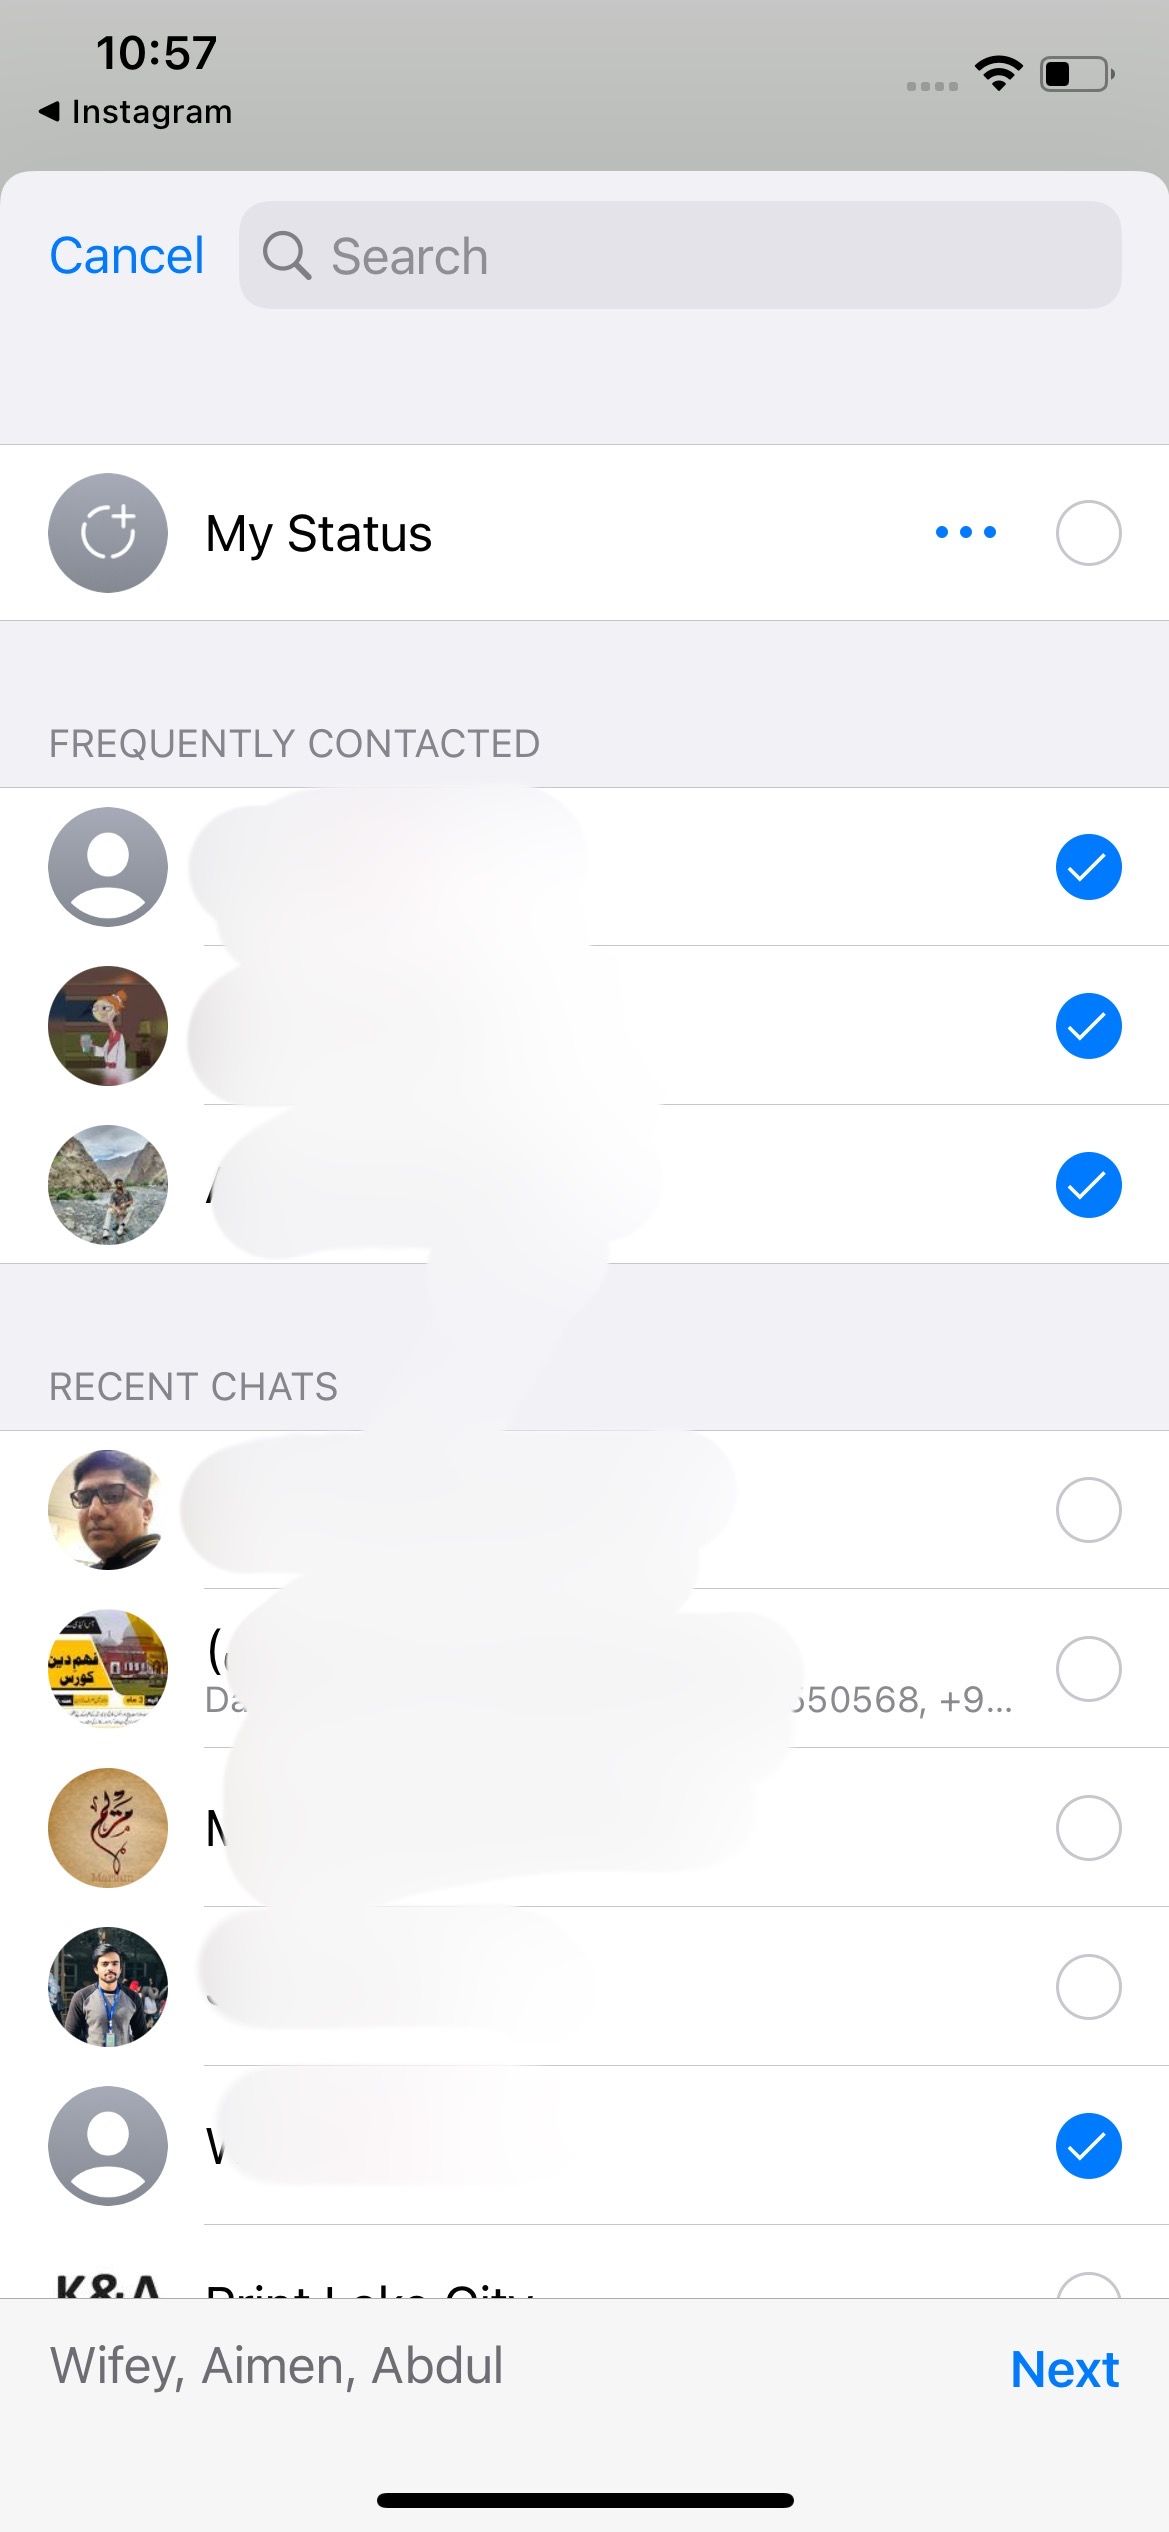 Choose contacts to send an invite